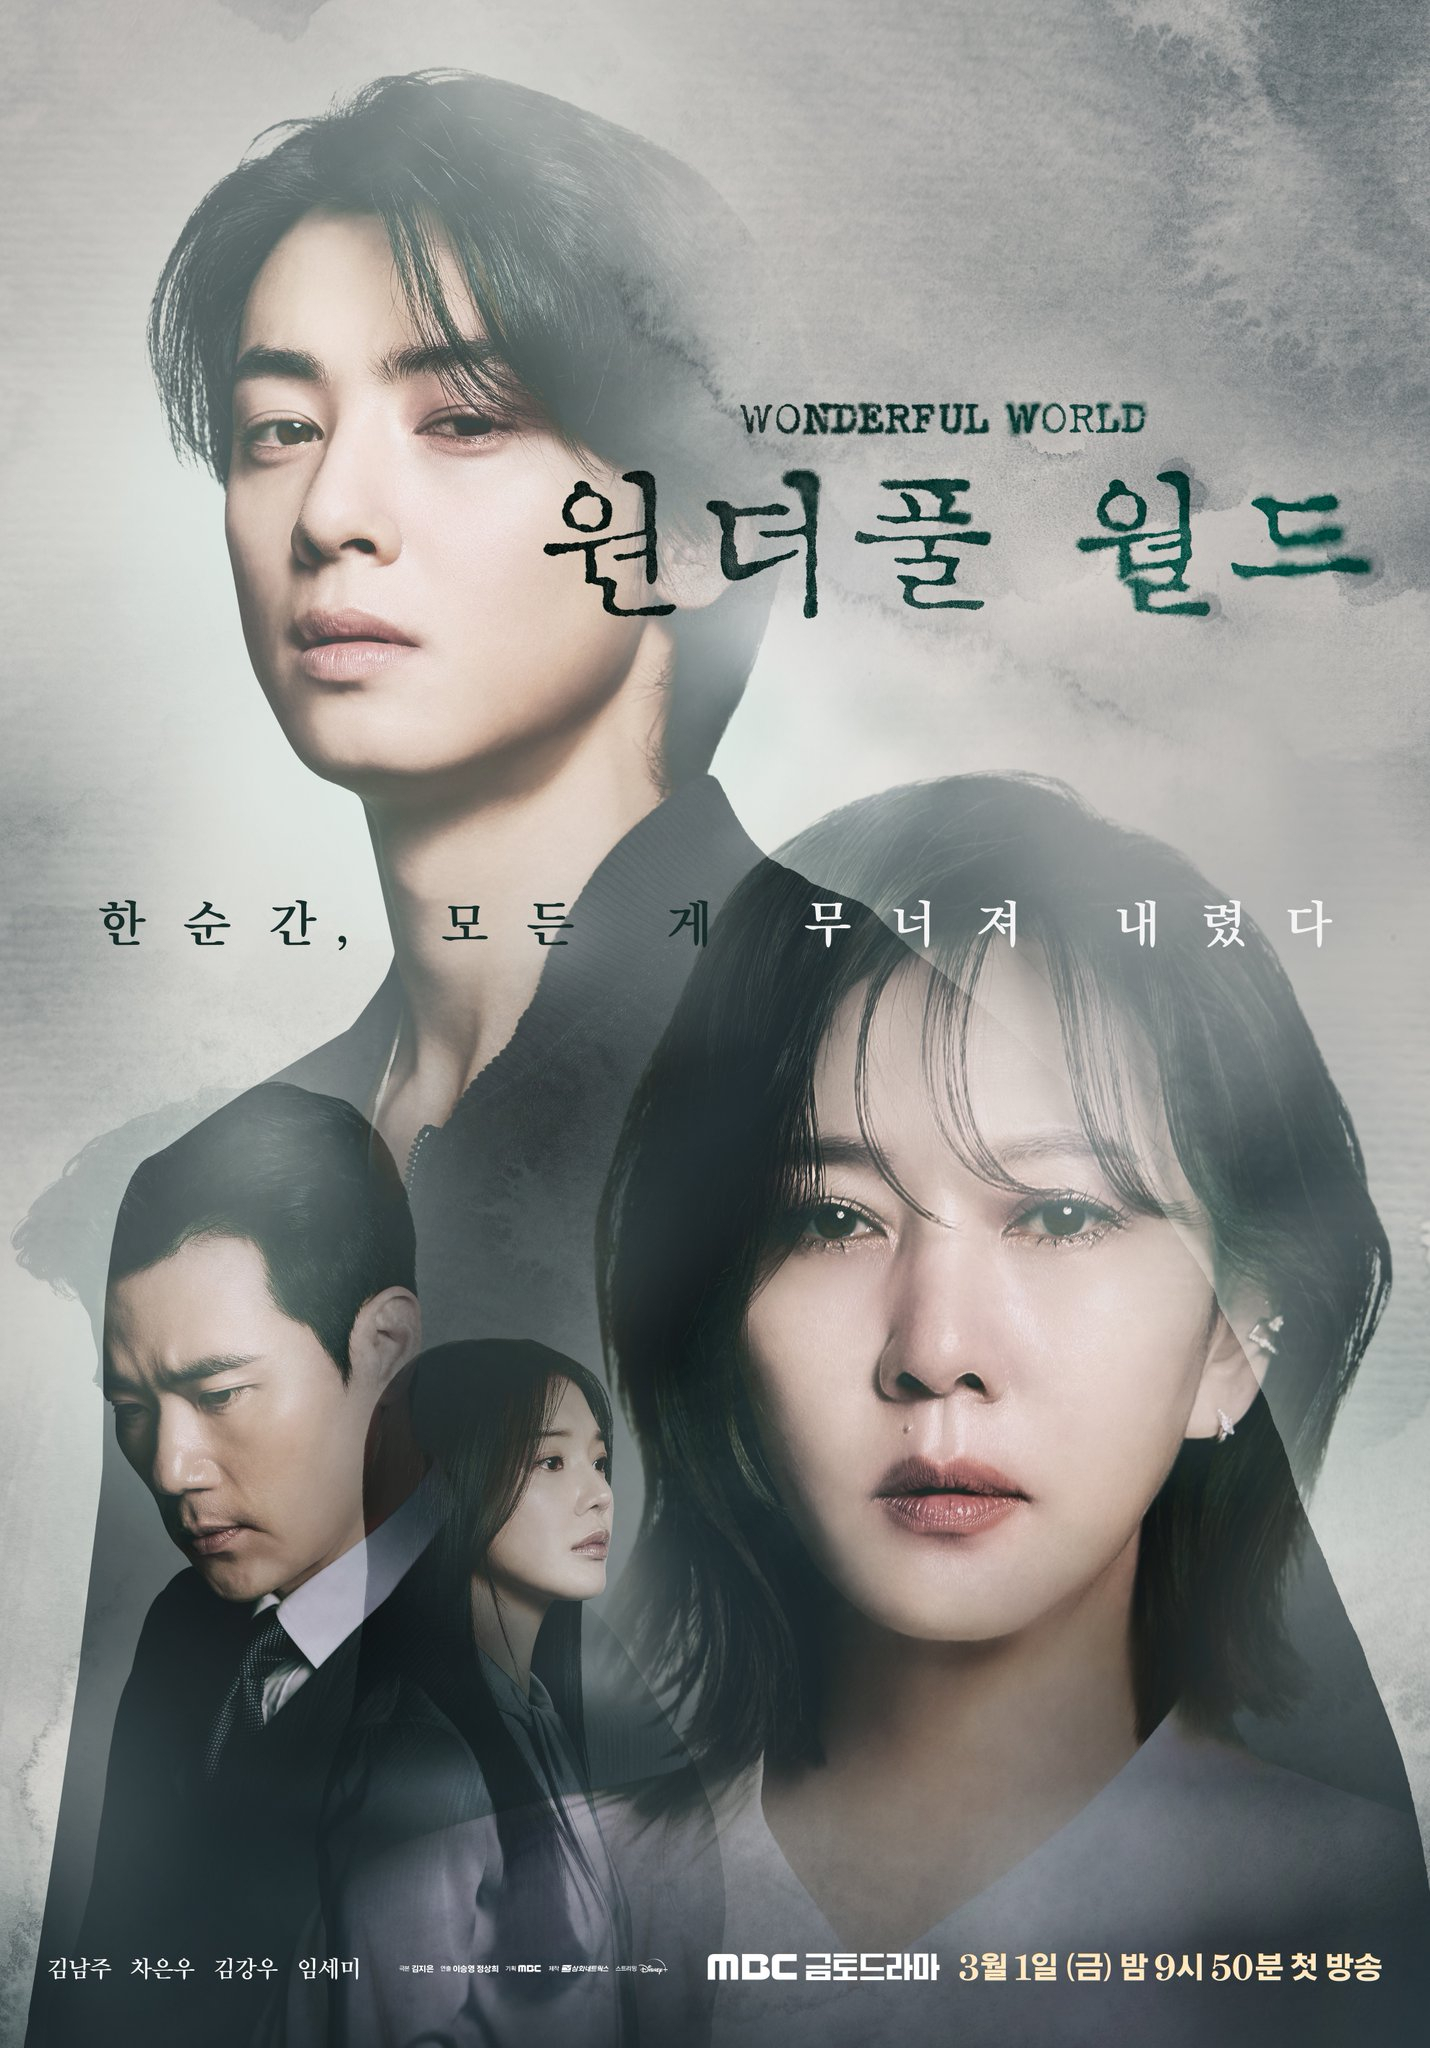 Wonderful World How to Watch, Airdate, Preview, Spoilers, and More of